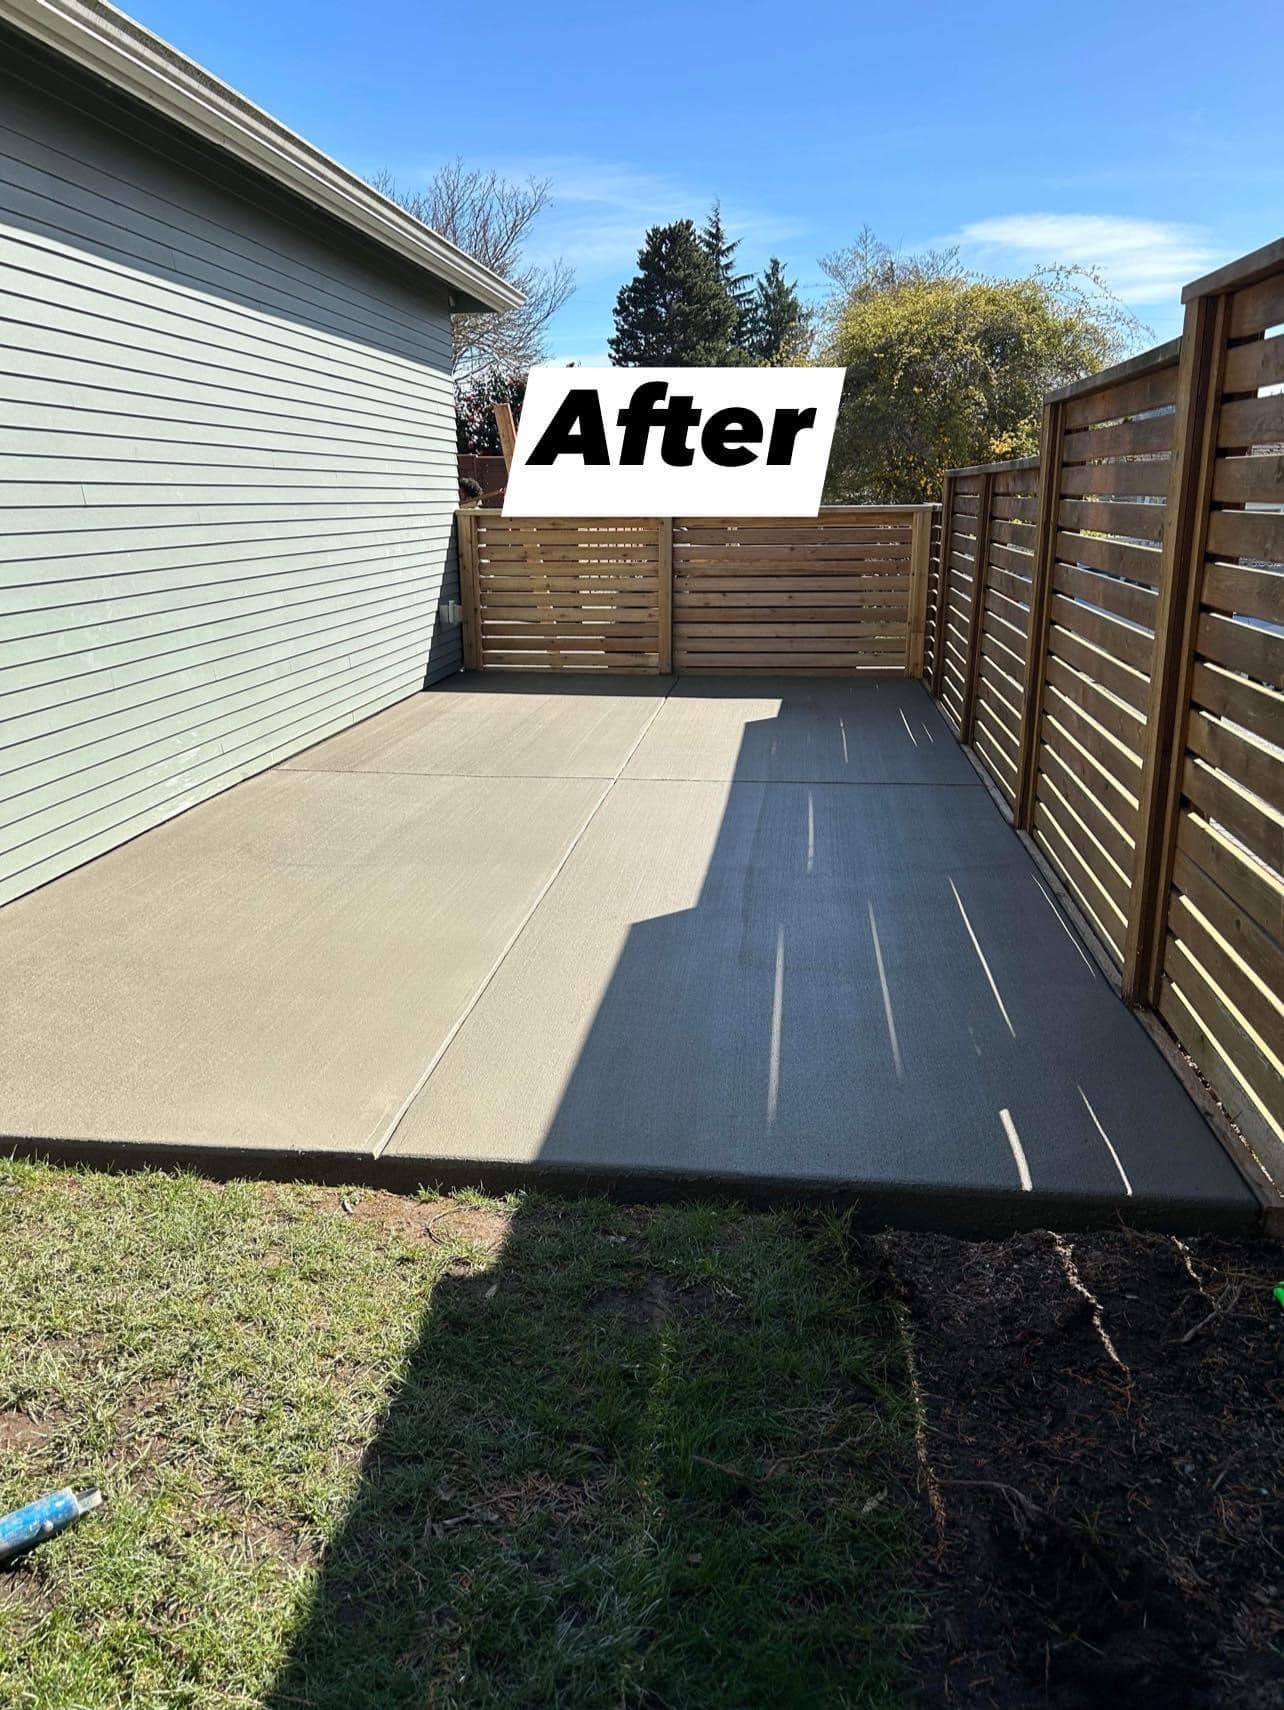 SEATTLE CONCRETE PAD PROJECT - After